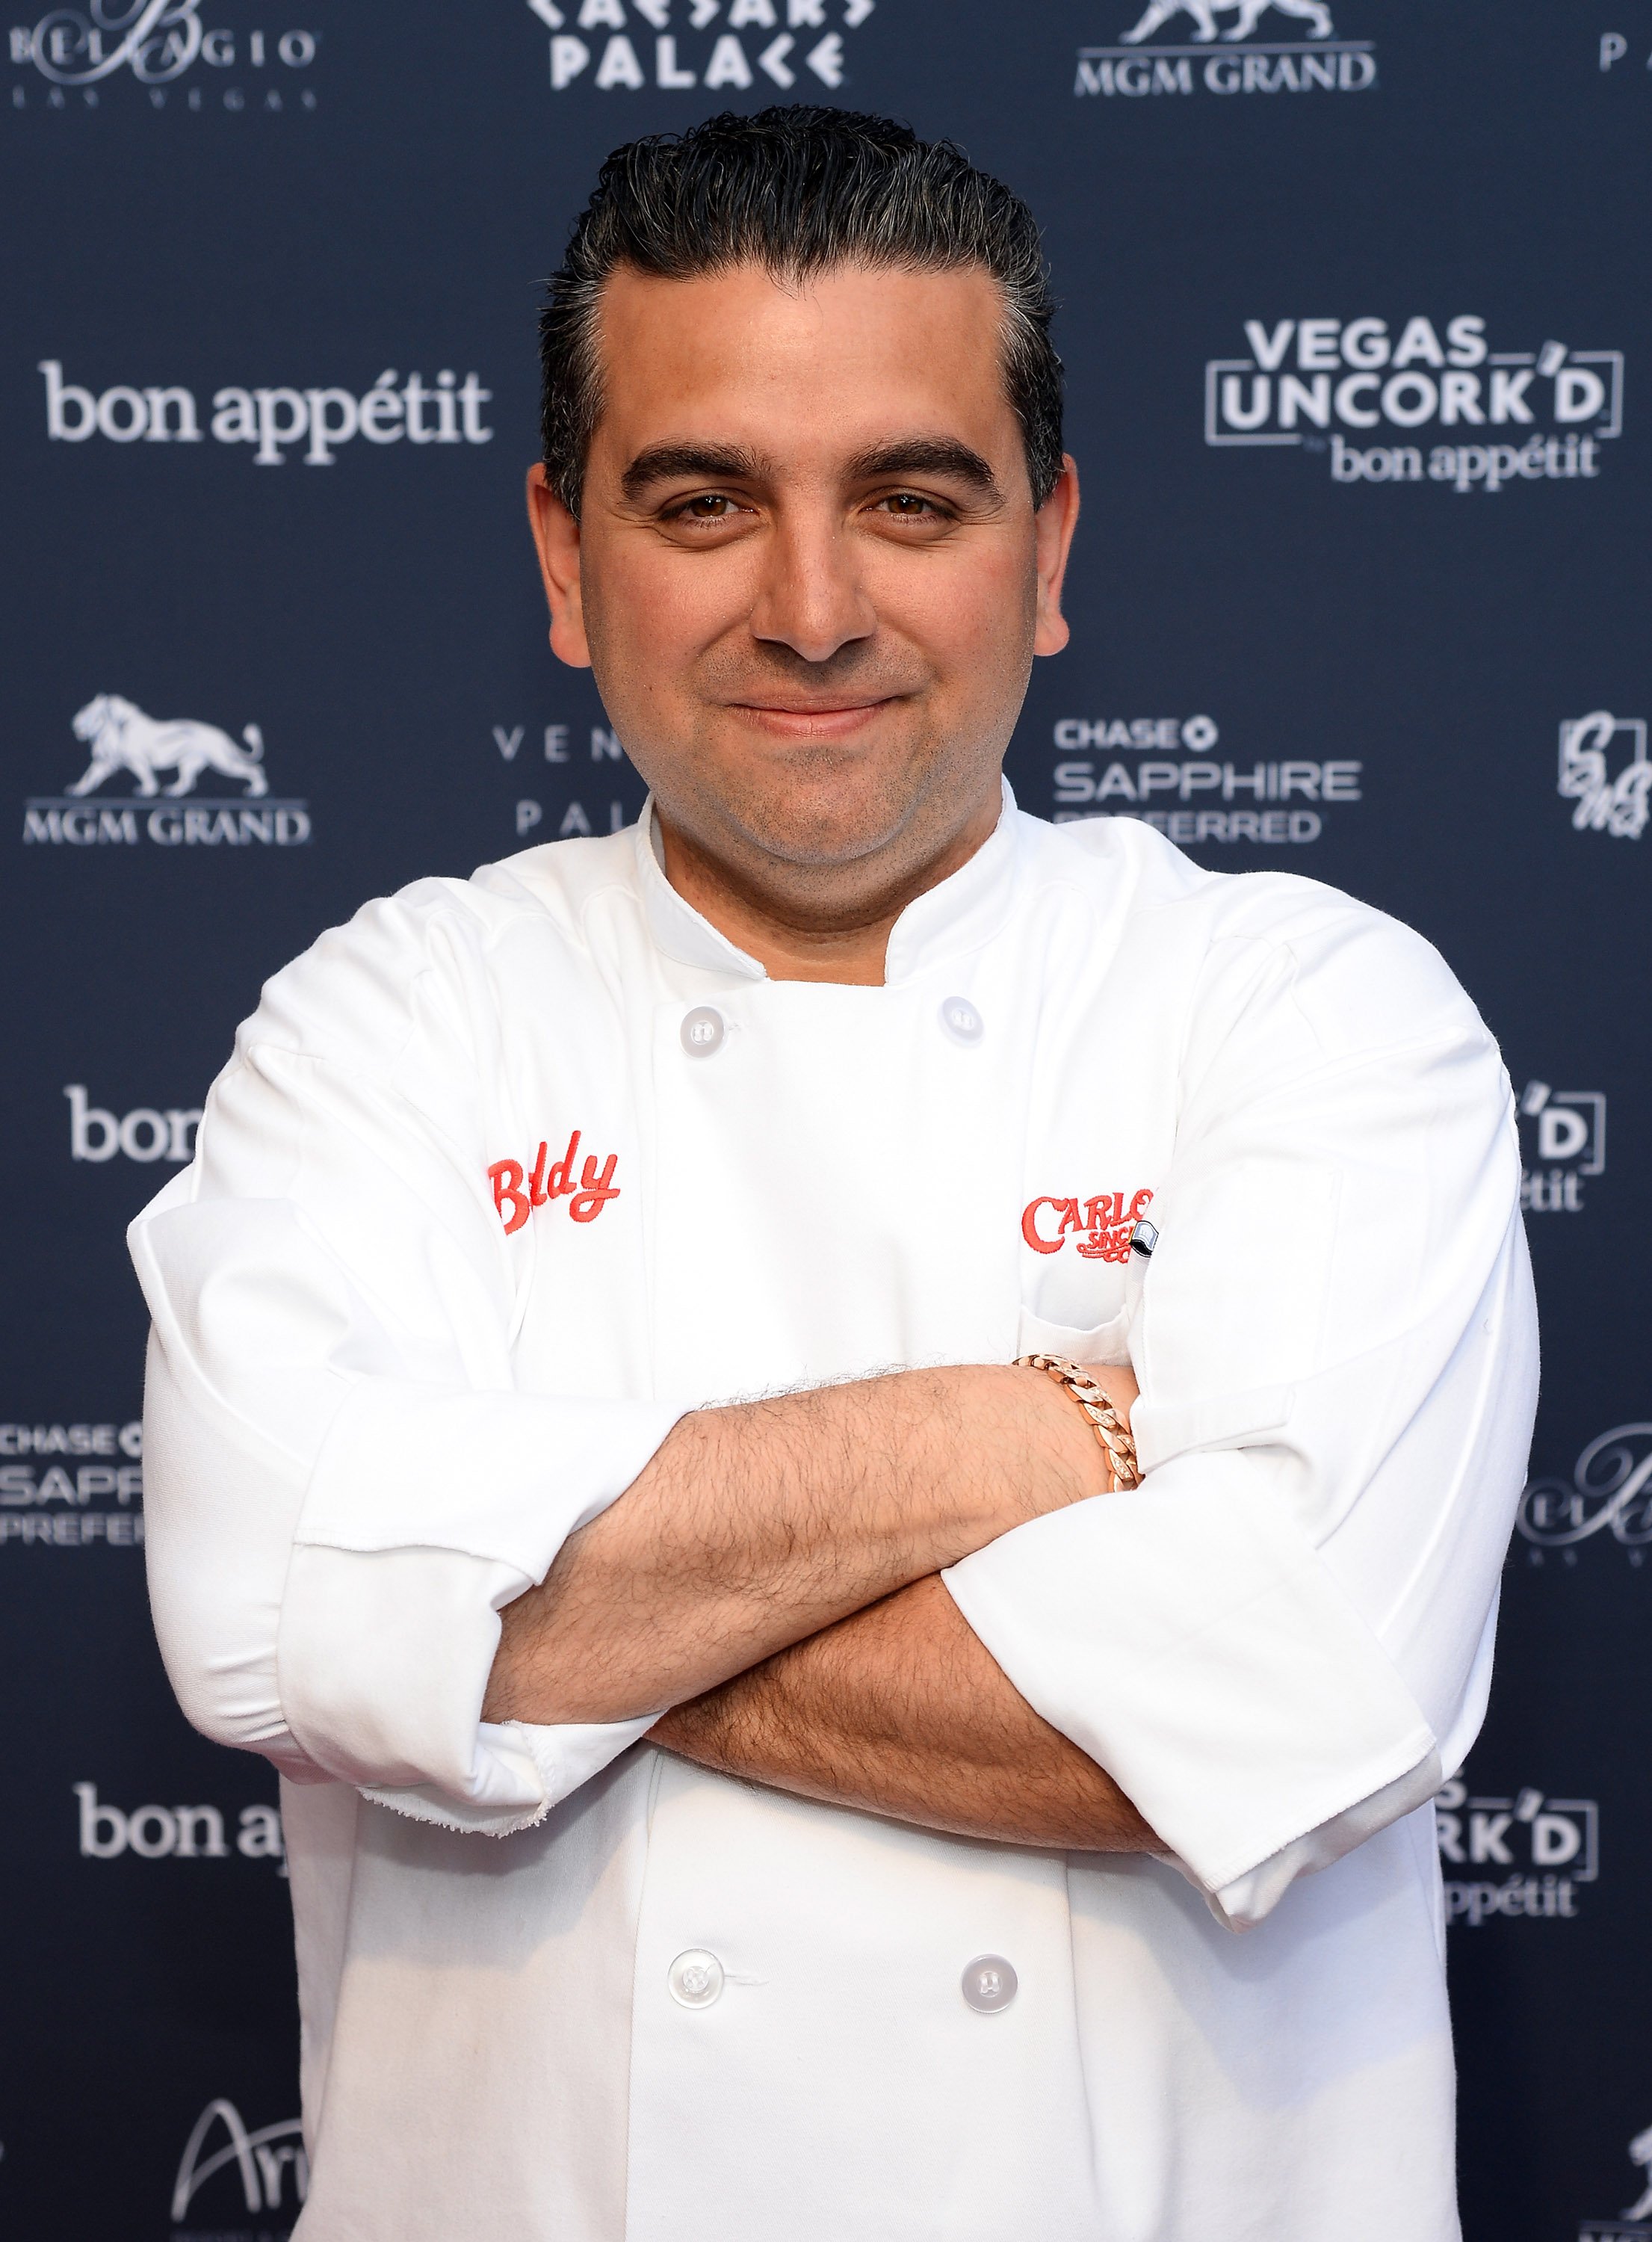 Buddy Valastro attends Vegas Uncork'd by Bon Appetit's Grand Tasting event on May 9, 2014, in Las Vegas, Nevada. | Source: Getty Images.